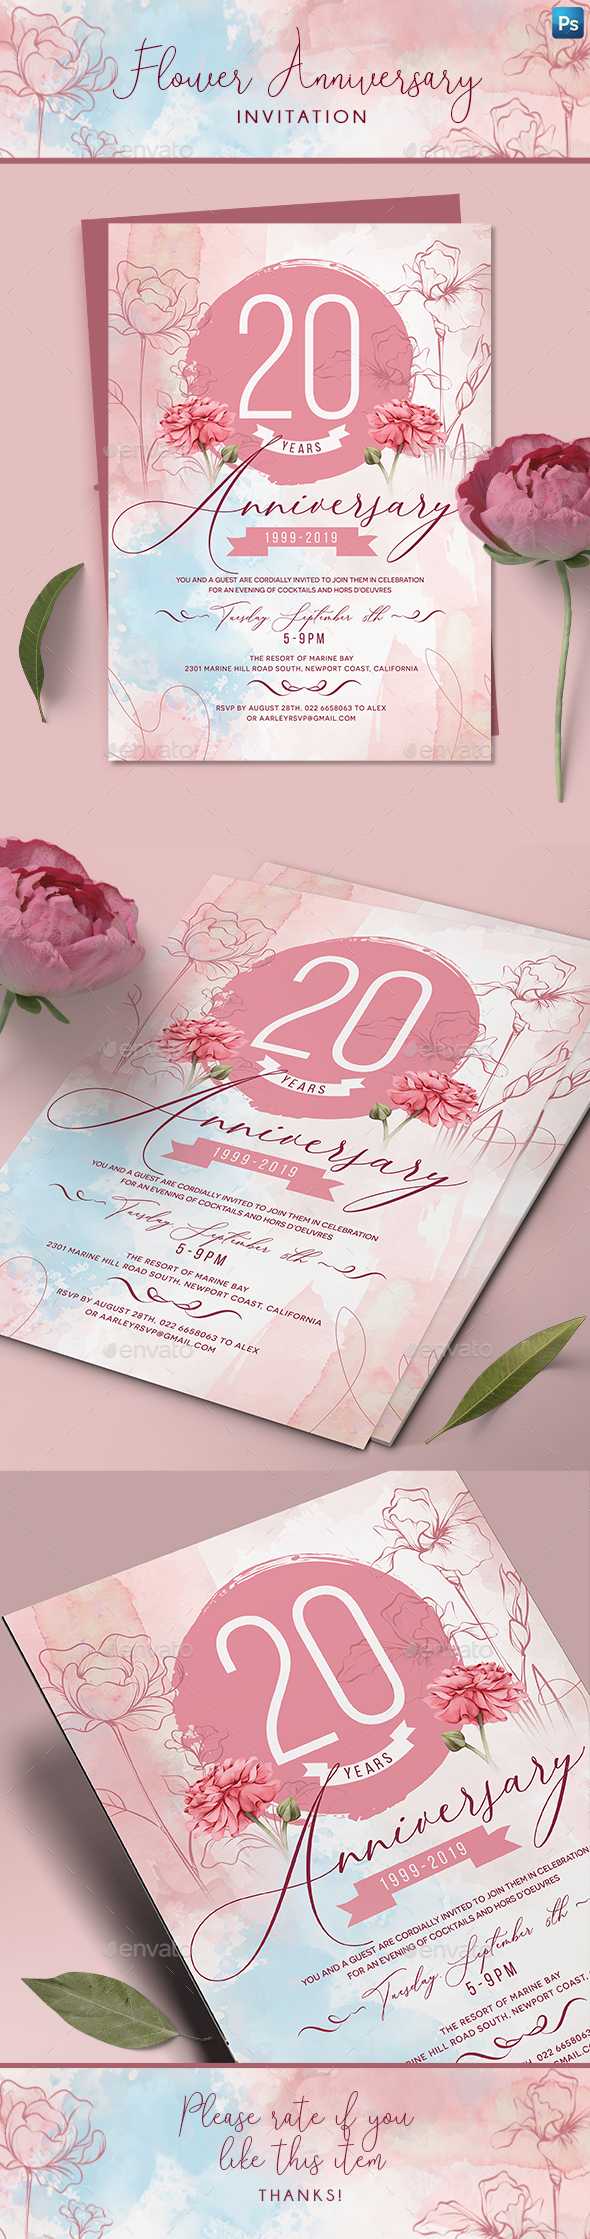 Greeting Card Designs & Templates From Graphicriver Intended For Death Anniversary Cards Templates